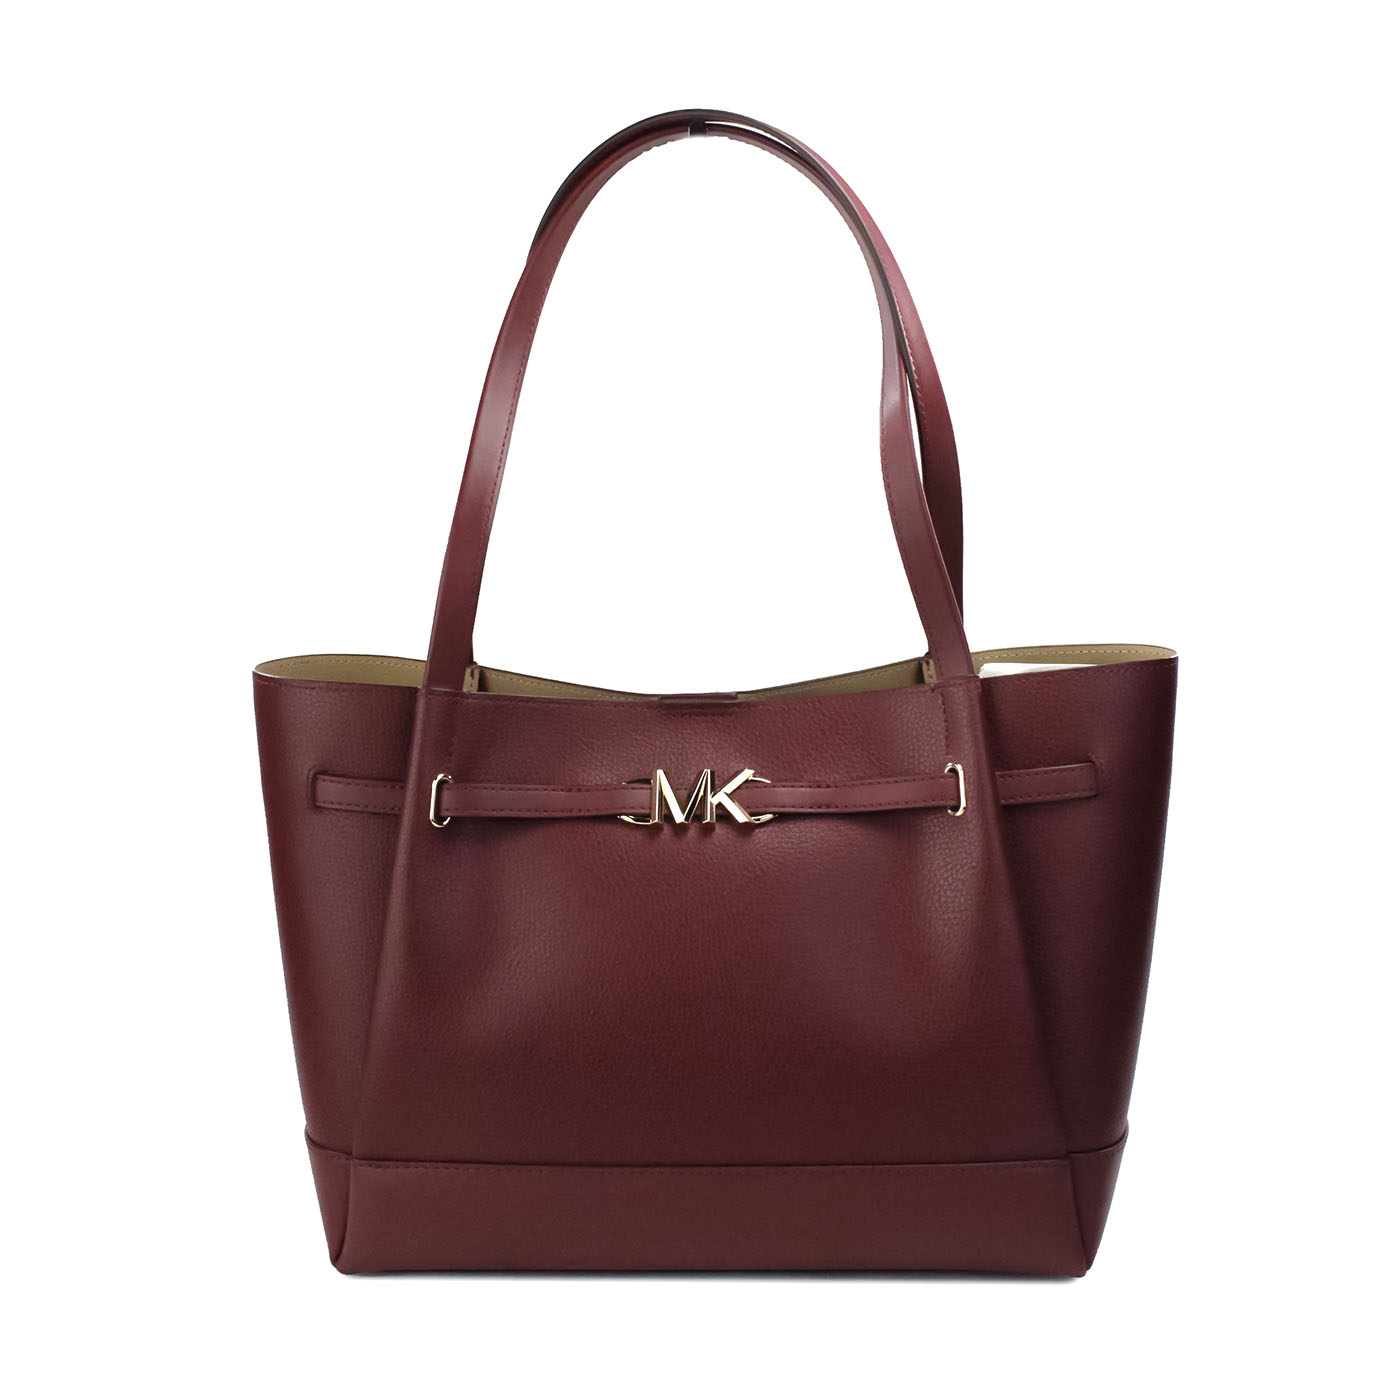 Reed Large Dark Cherry Leather Belted Tote Shoulder Bag Purse BY Michael Kors - Shoulder Bags available at DOYUF